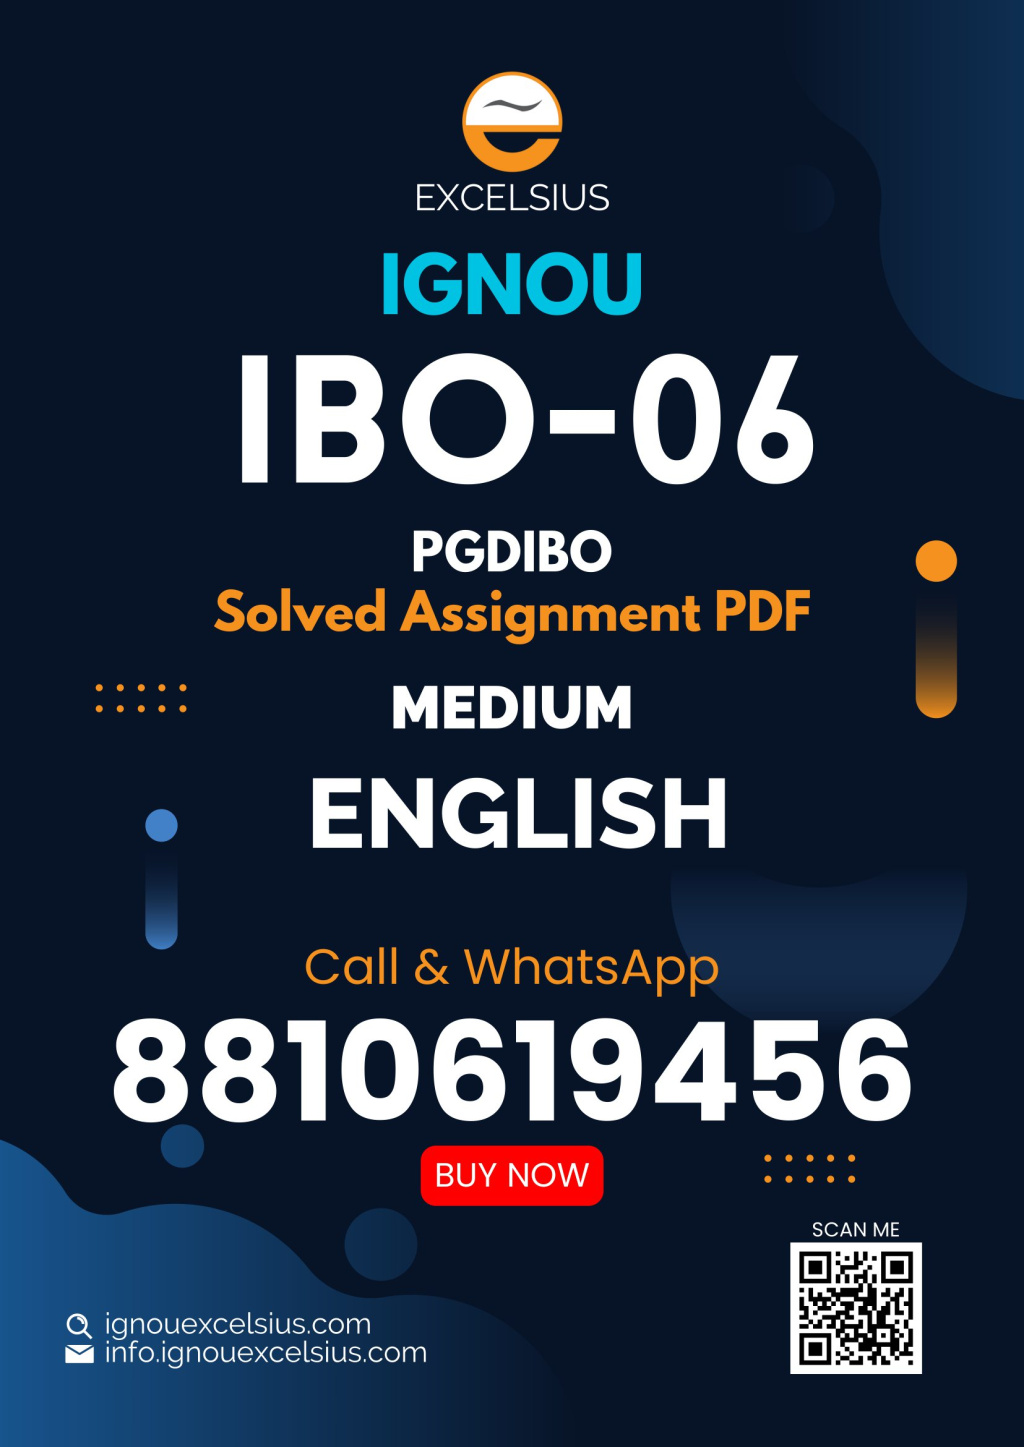 IGNOU IBO-06 (PGDIBO) - International Business Finance Latest Solved Assignment-January 2023 - July 2023